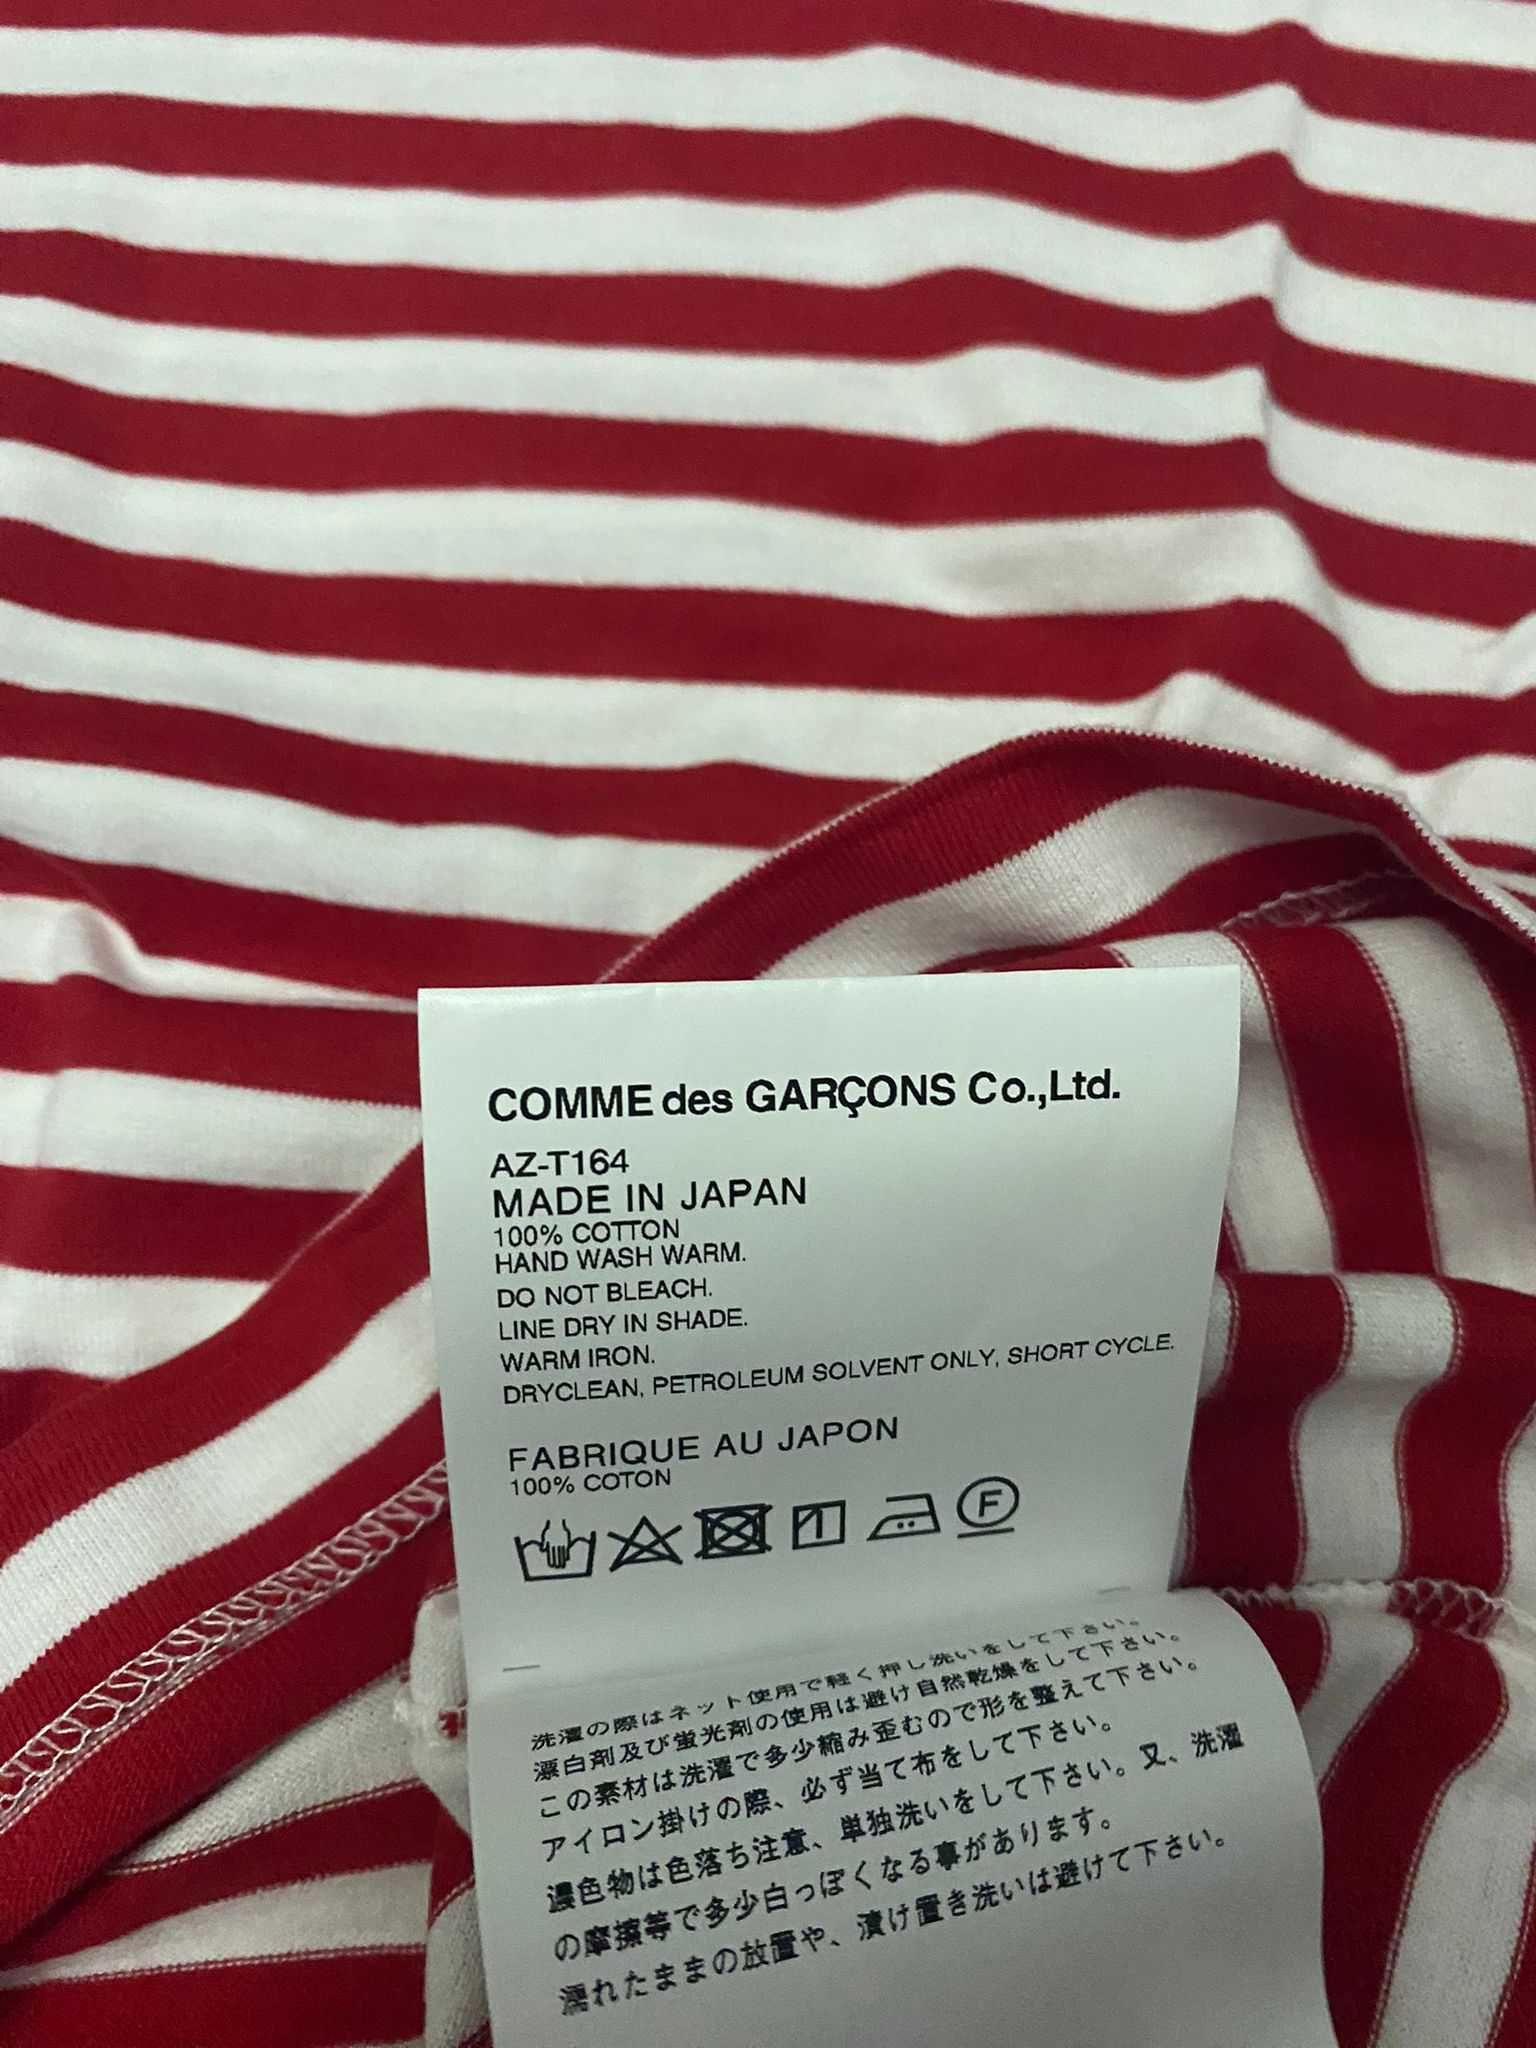 Bluza Comme Des Garcons Striped Long Sleeve Red